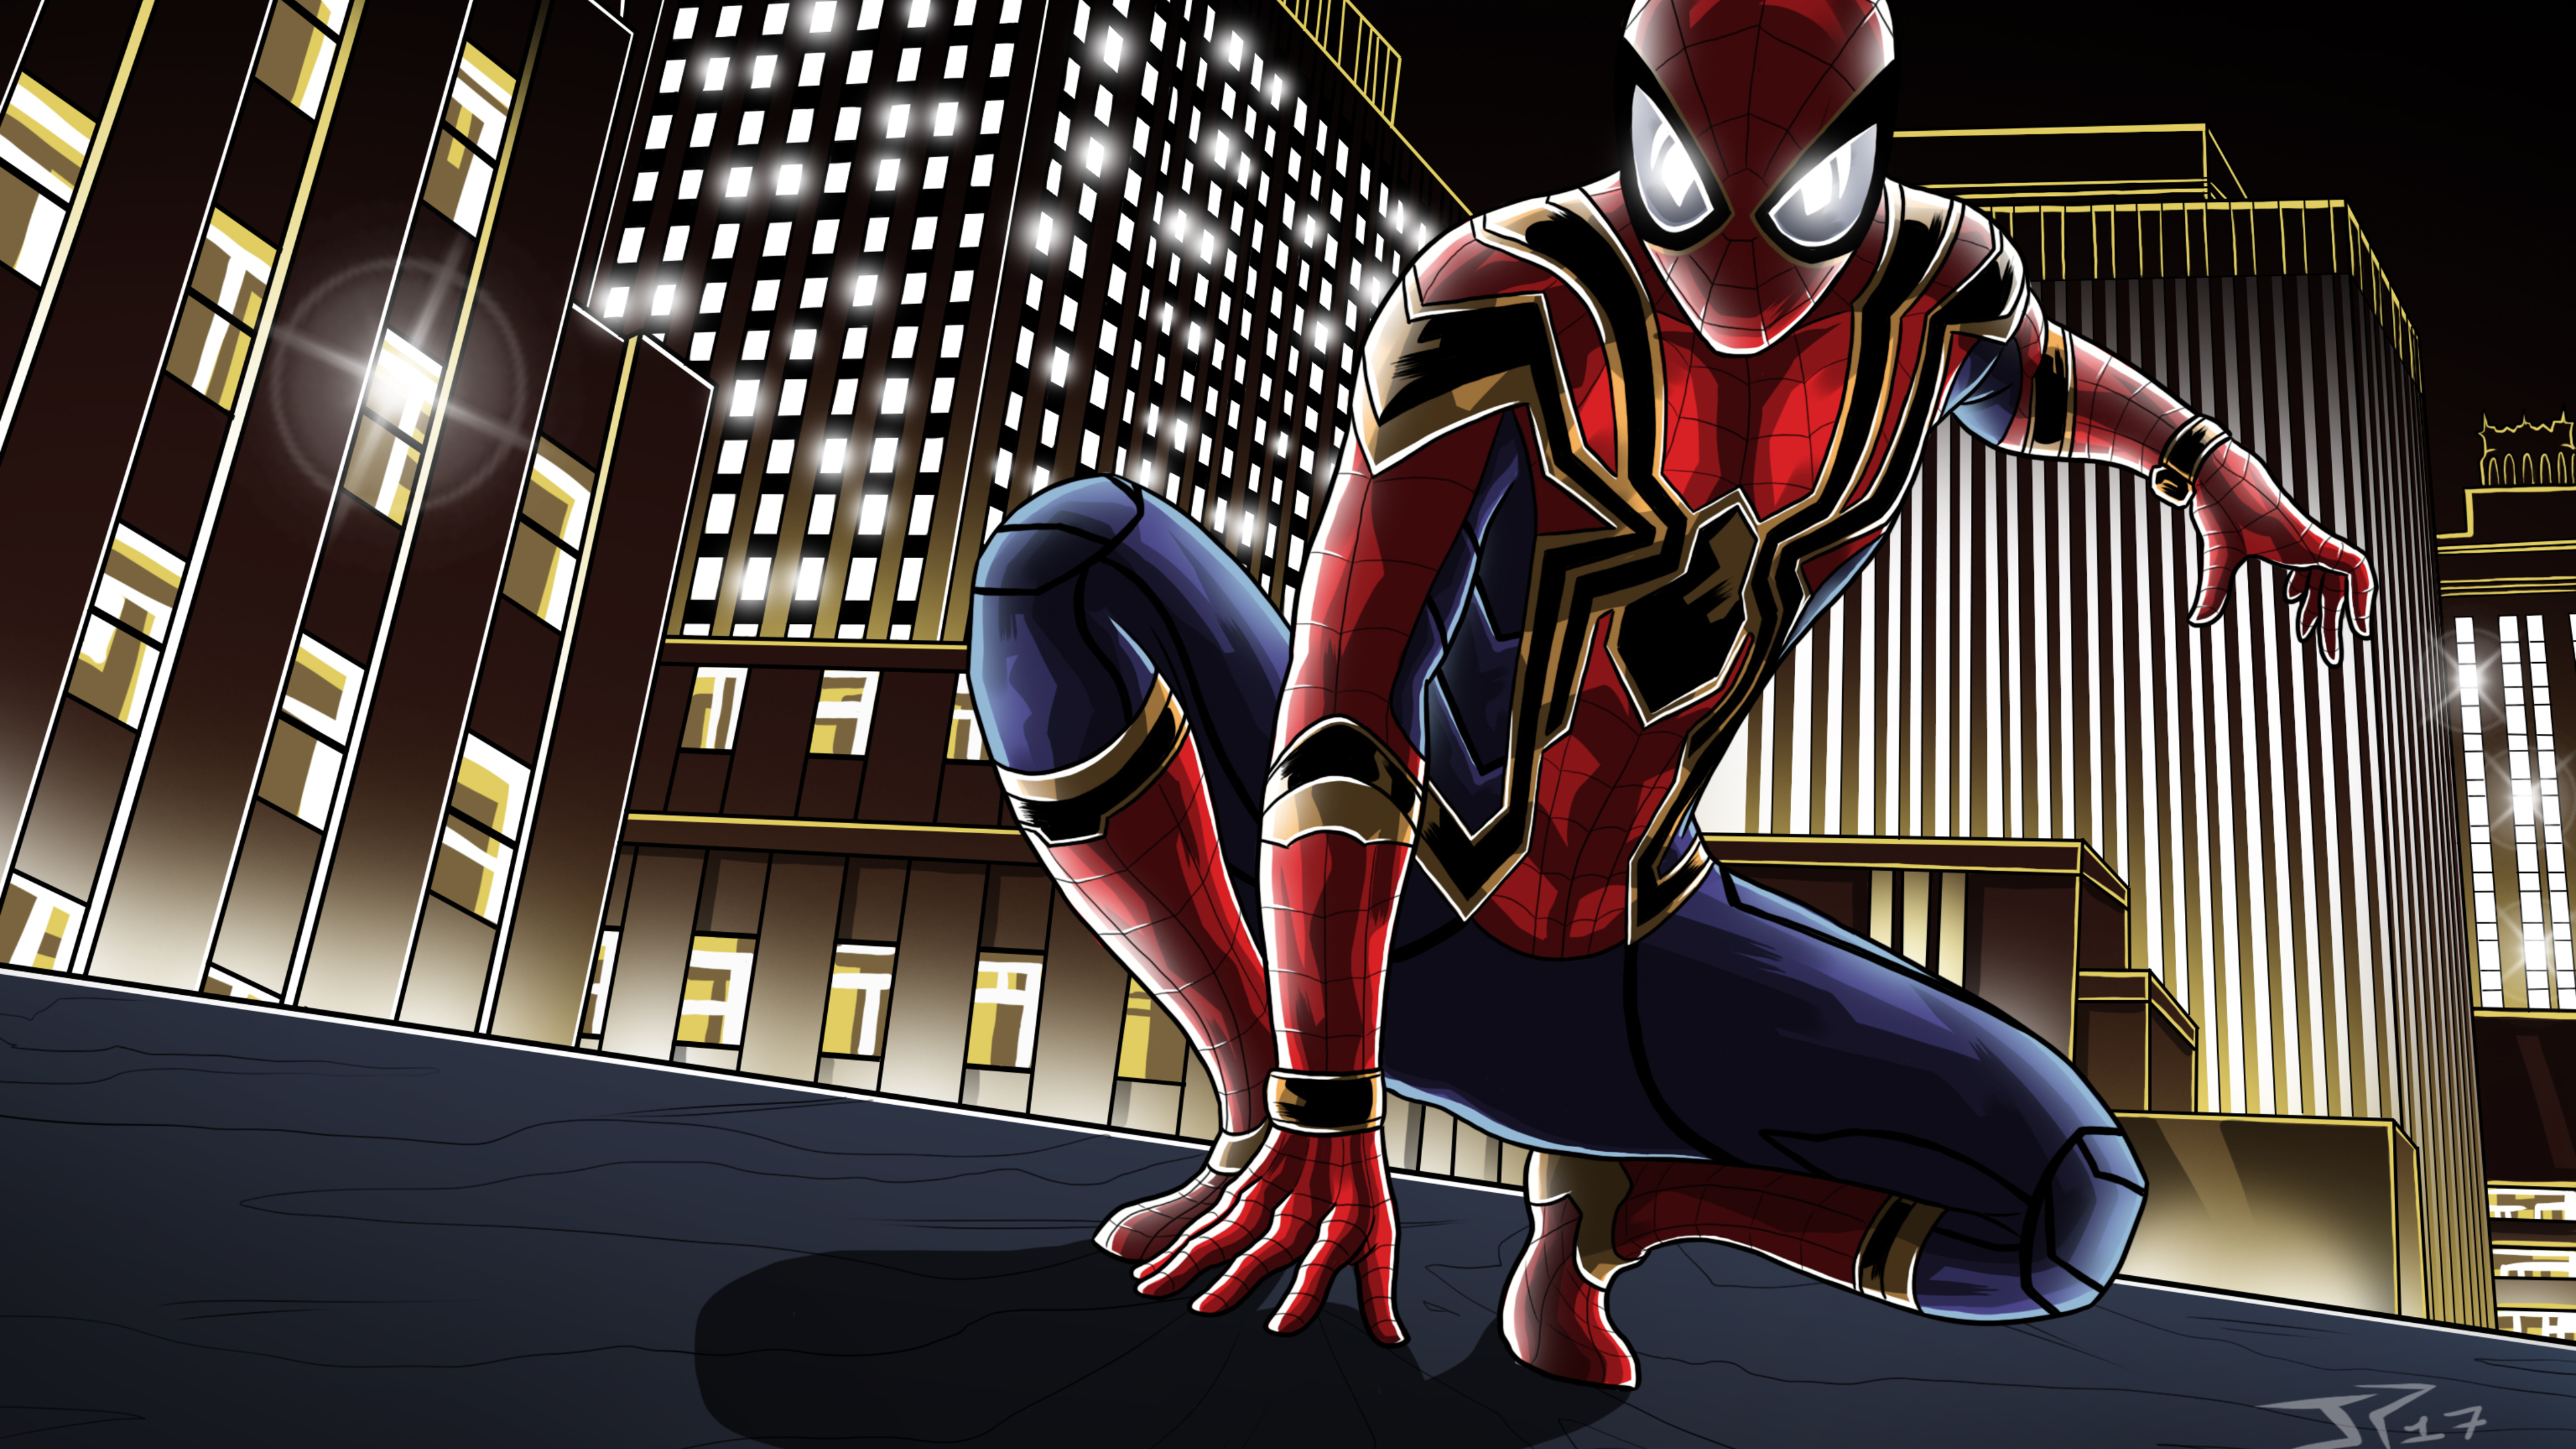 Iron Spider Suit In Avengers Infinity War Artwork In 3840x2160 Resolution. iron...